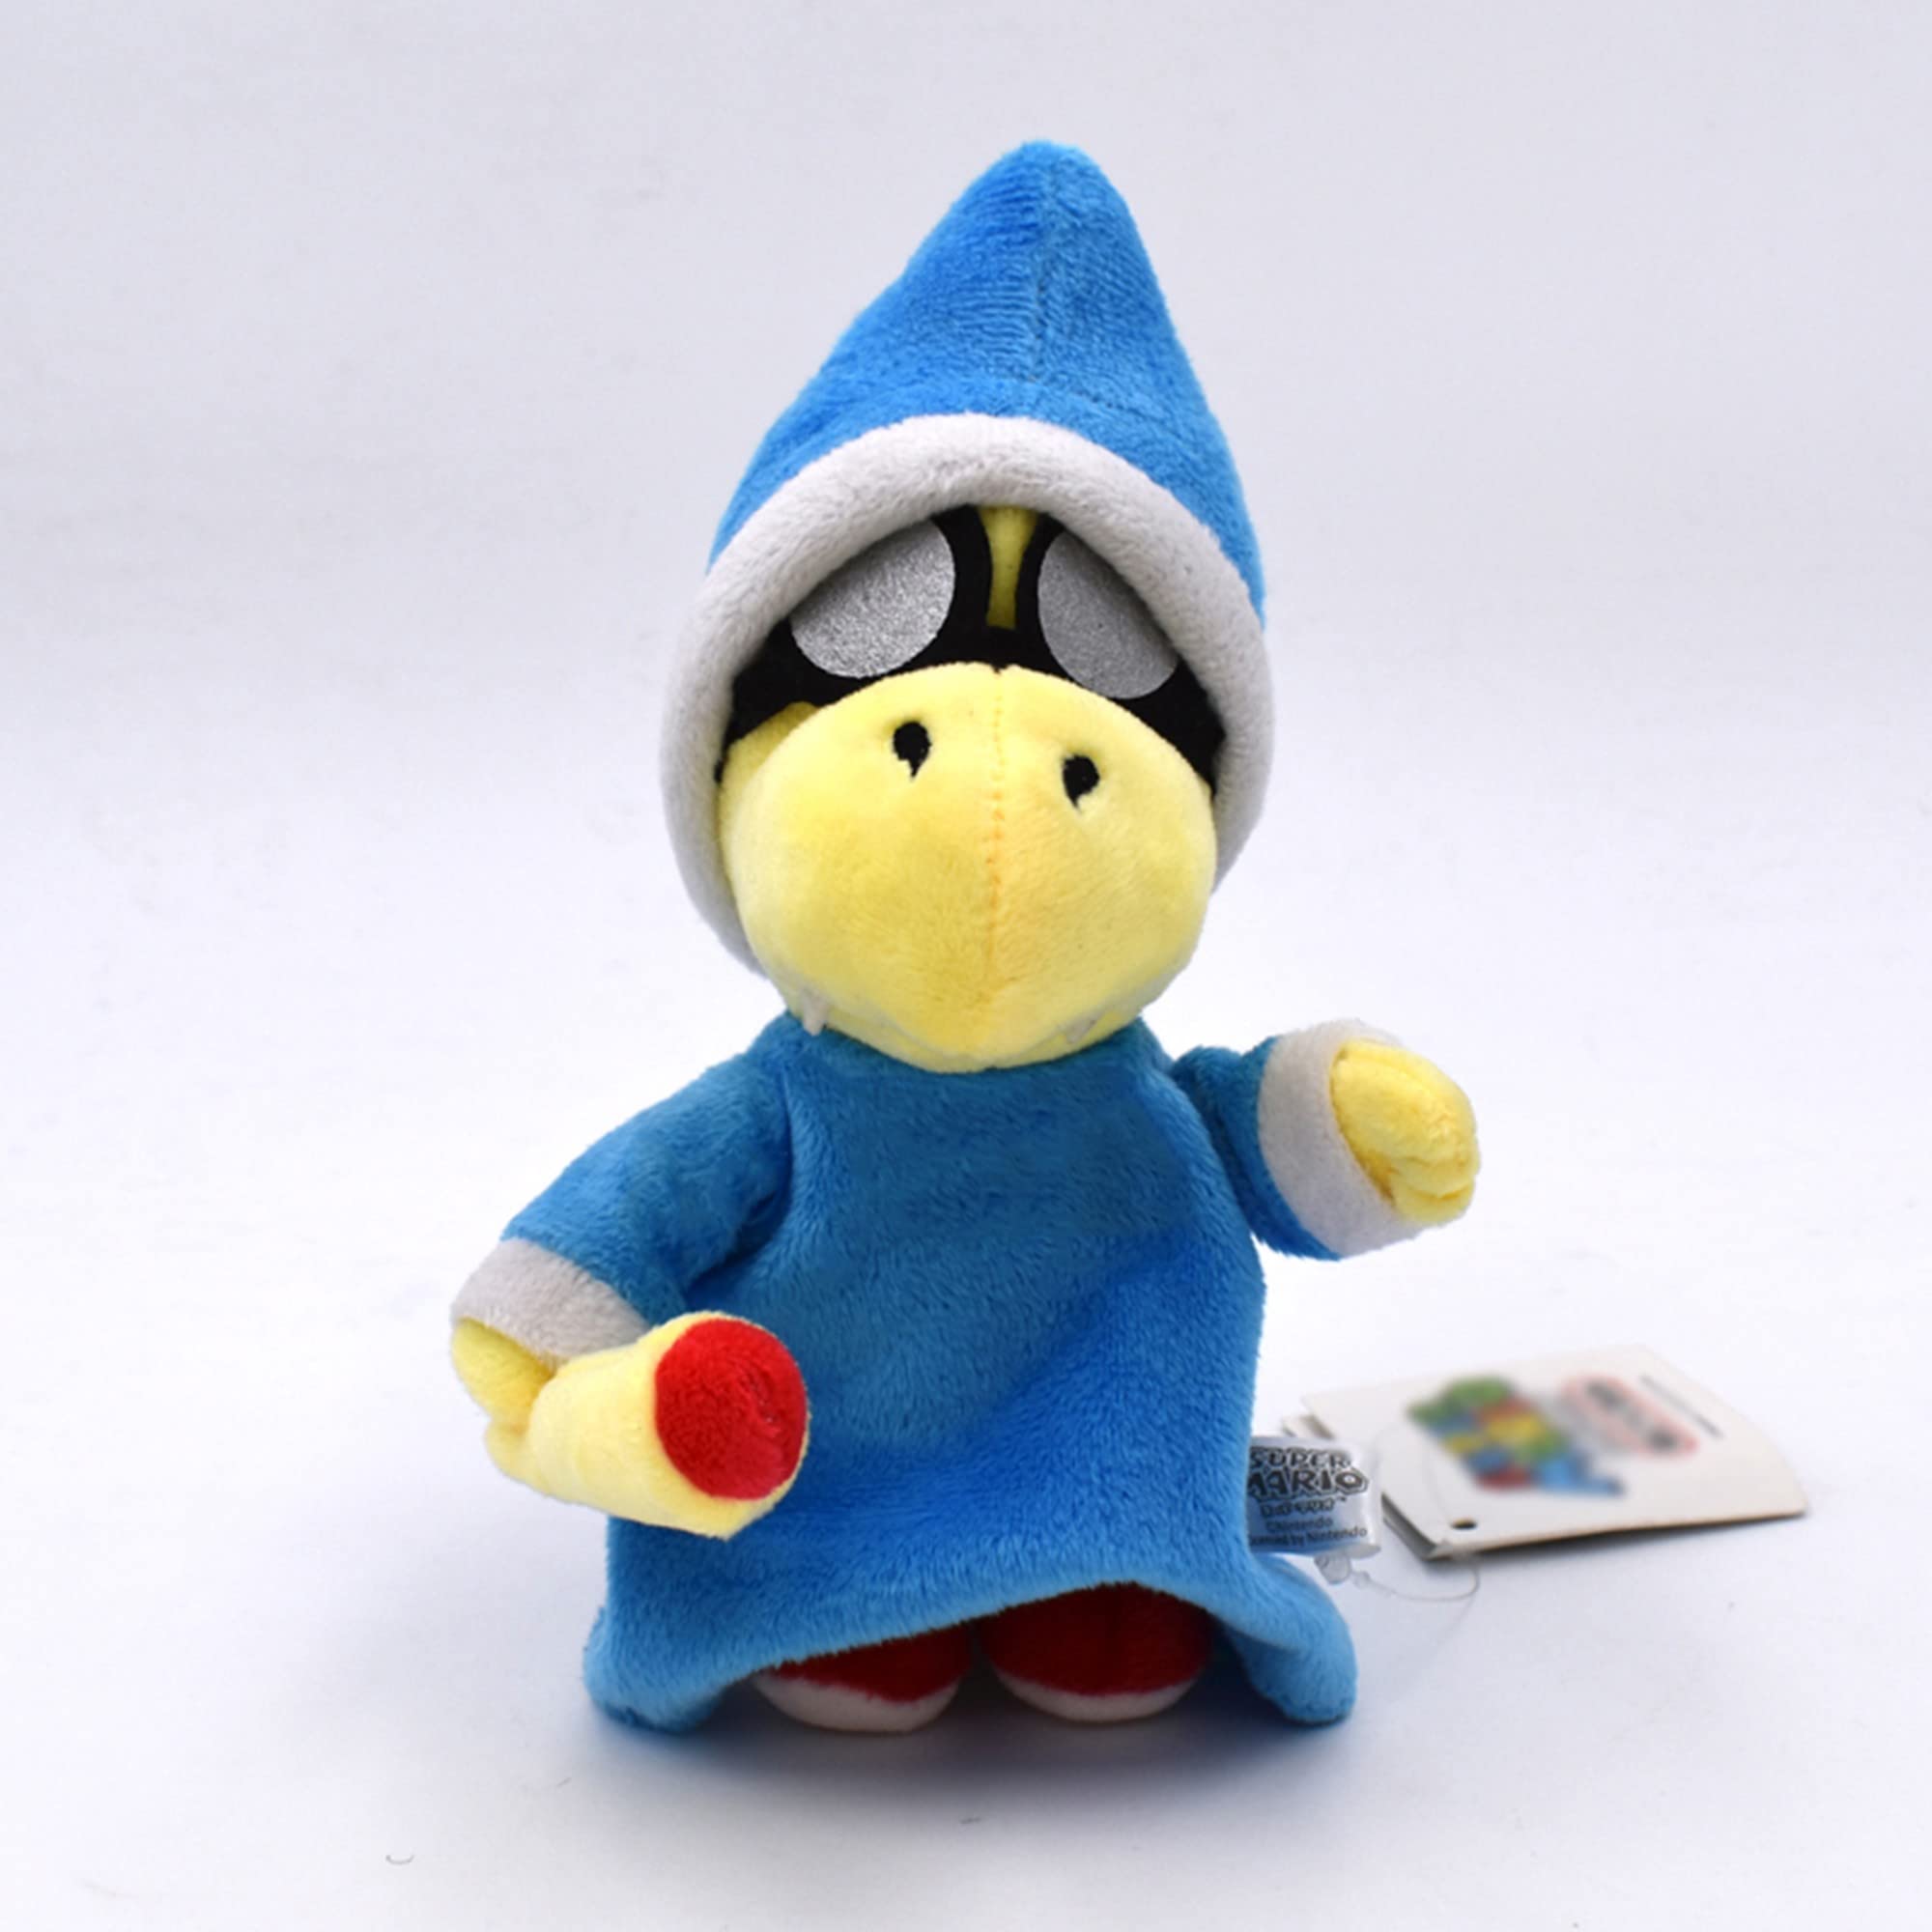 Rgvv super ma all star collection blue kamek magikoopa stuffed plush with the red wand toys games